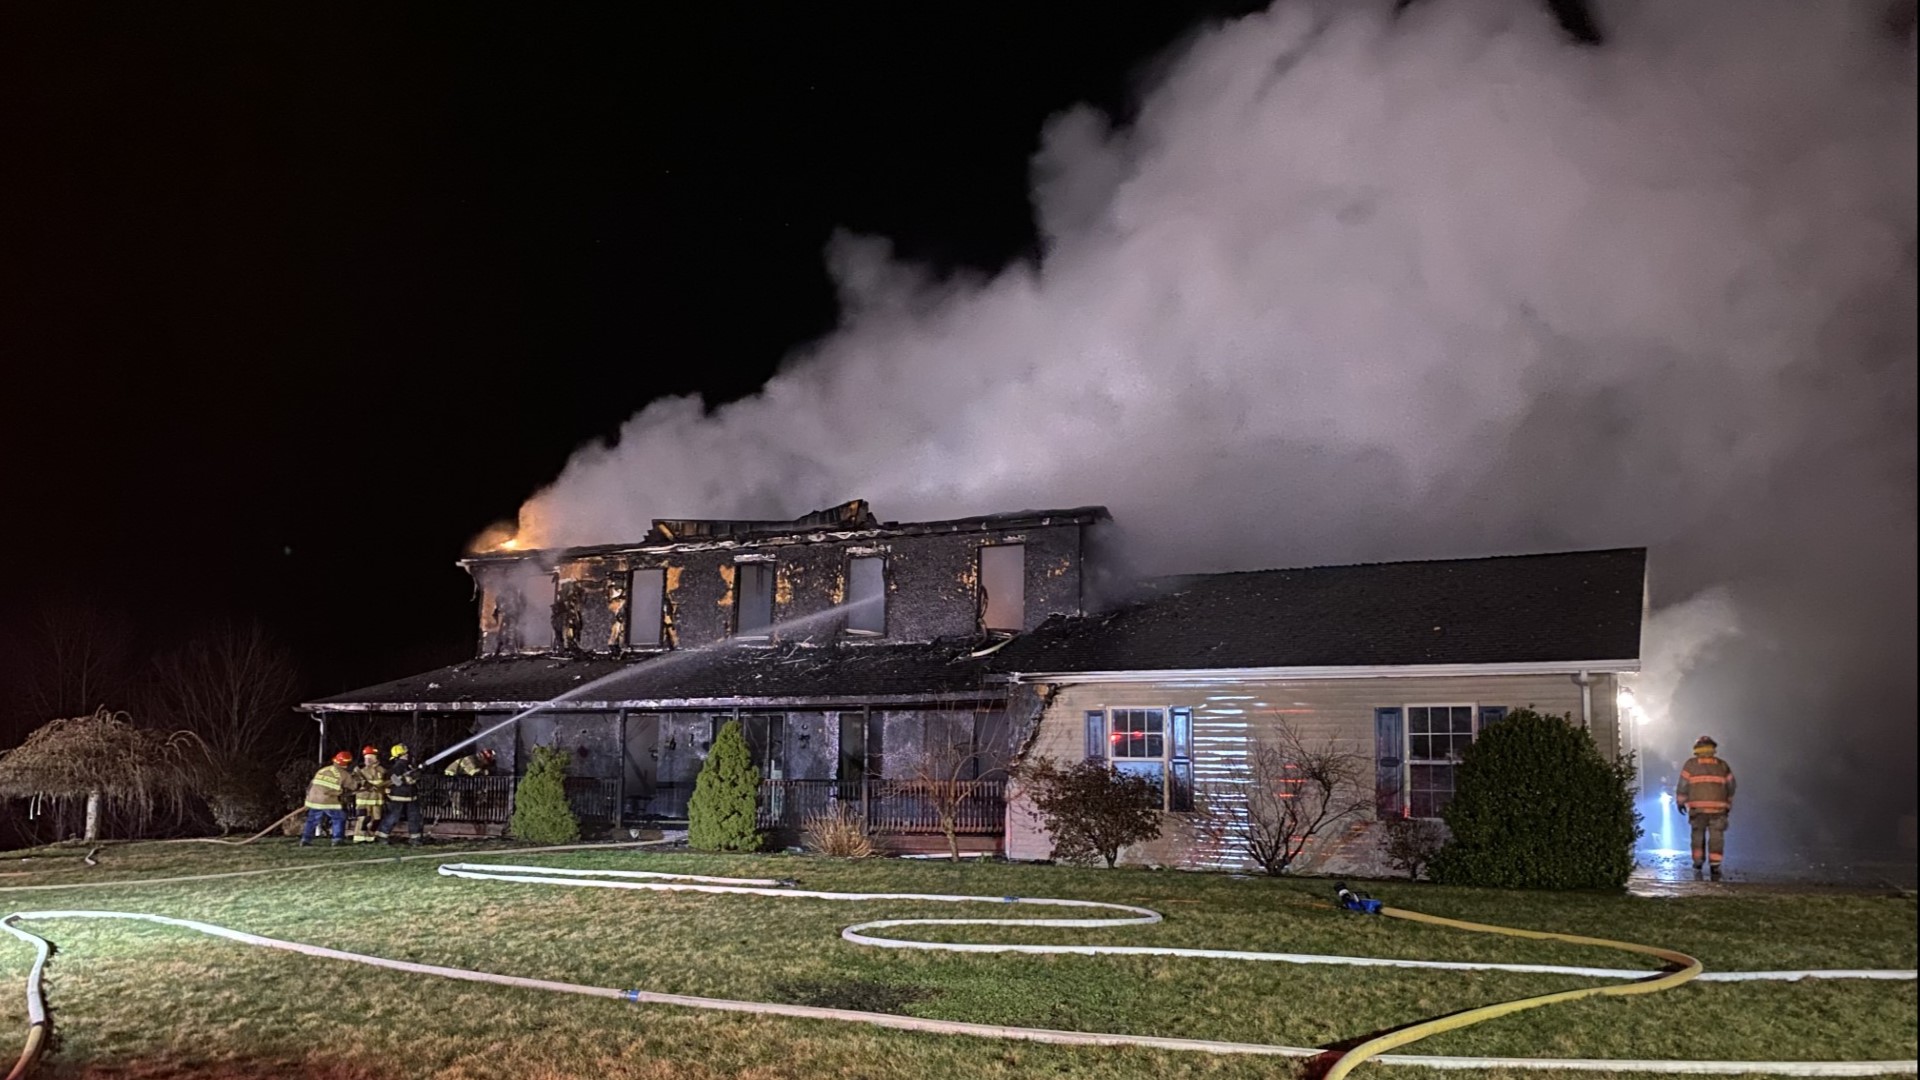 Crews responded to a home along Harris Pond Road in Ross Township around 4 a.m. Sunday to battle the flames.